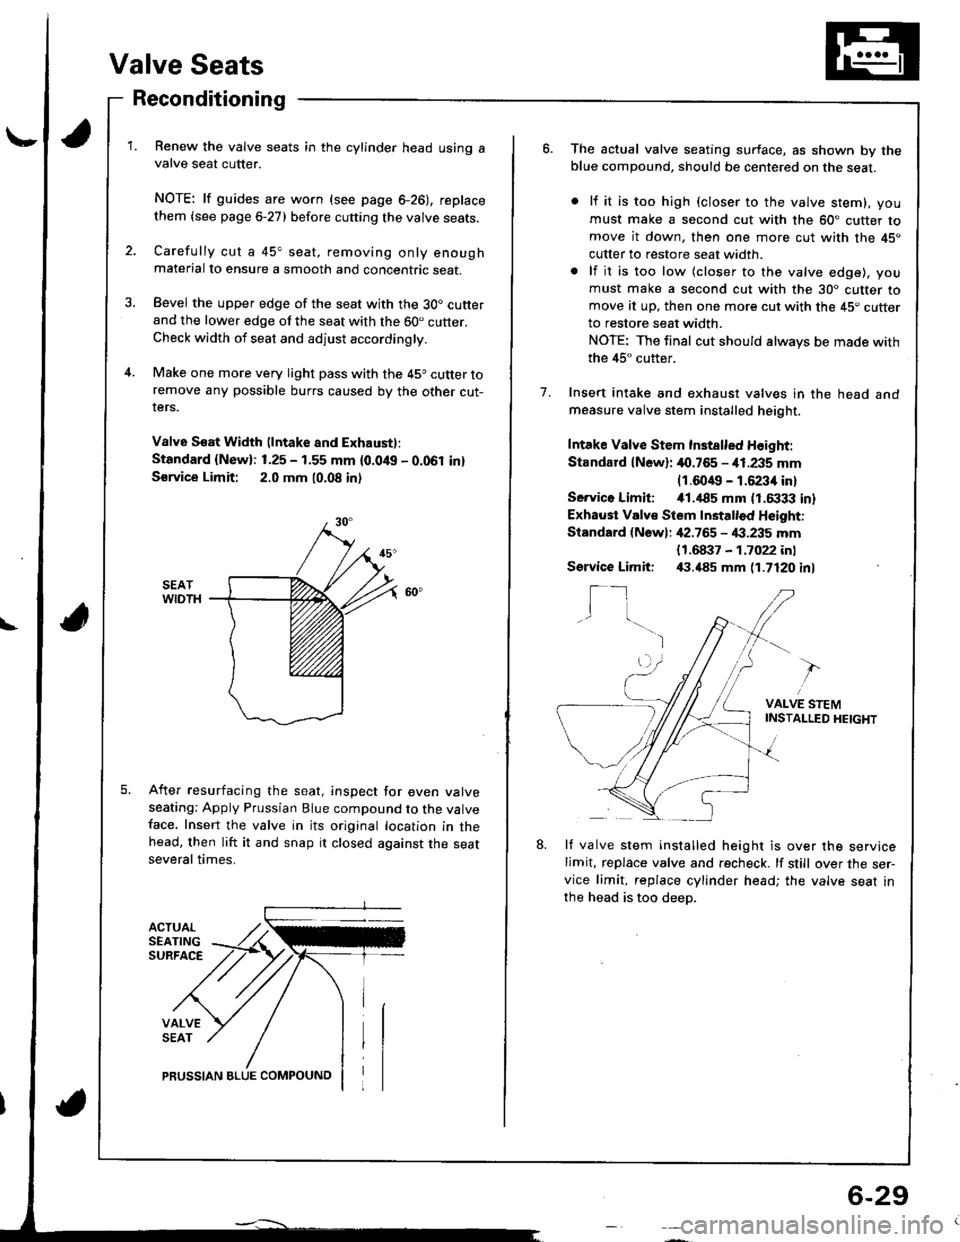 HONDA INTEGRA 1998 4.G Workshop Manual \
Valve Seats
Reconditioning
ACTUALSEATINGSURFACE
VALVESEAT
Renew the valve seats in the cylinder head using avalve seat cutter.
NOTE: lf guides are worn (see page 6-26), replace
them {see page 6-27) 